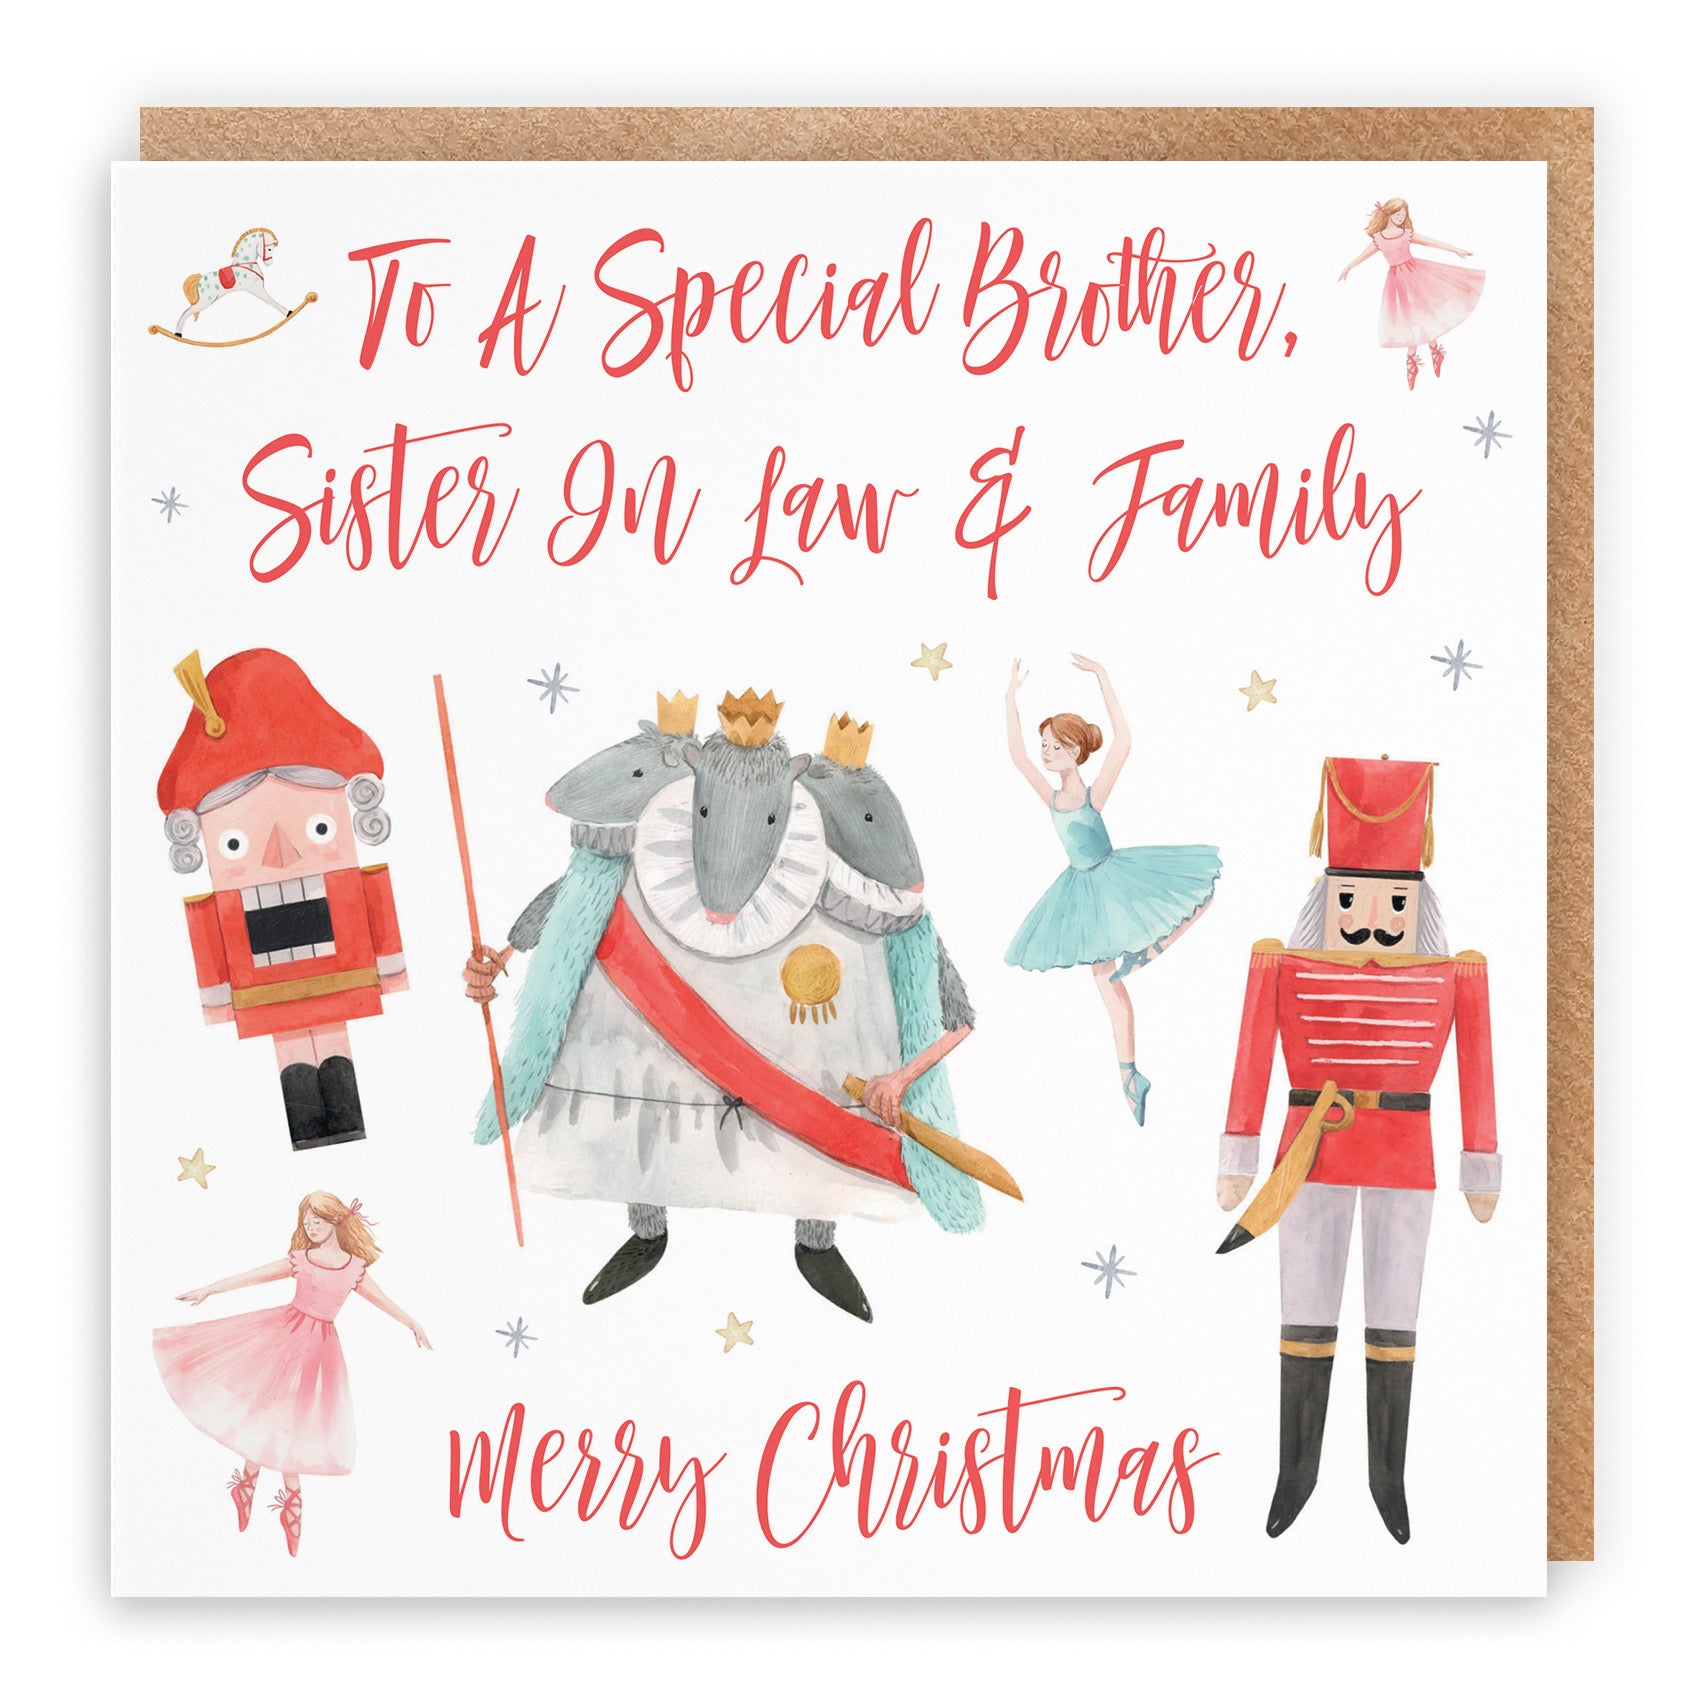 Brother, Sister In Law And Family Nutcracker Christmas Card - Default Title (B09JVBJ4LX)